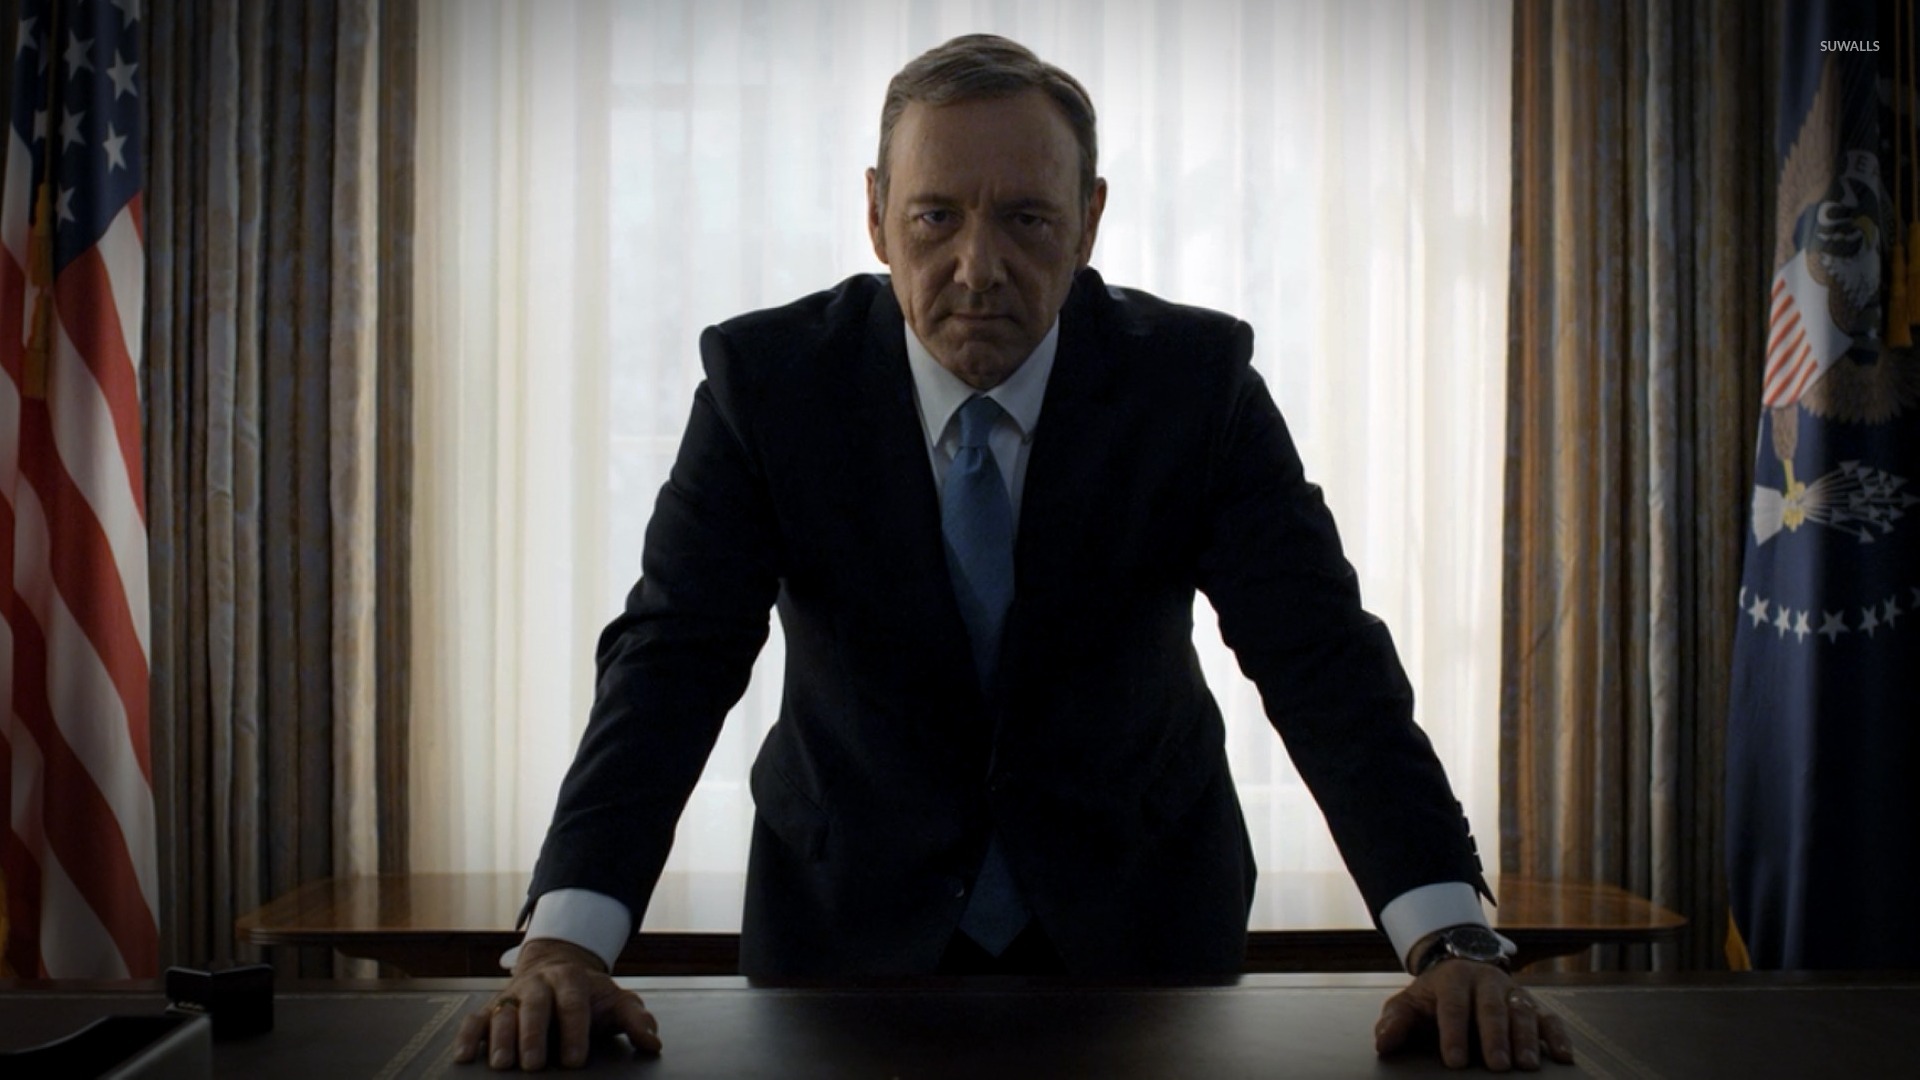 Frank Underwood   House of Cards wallpaper   TV Show wallpapers